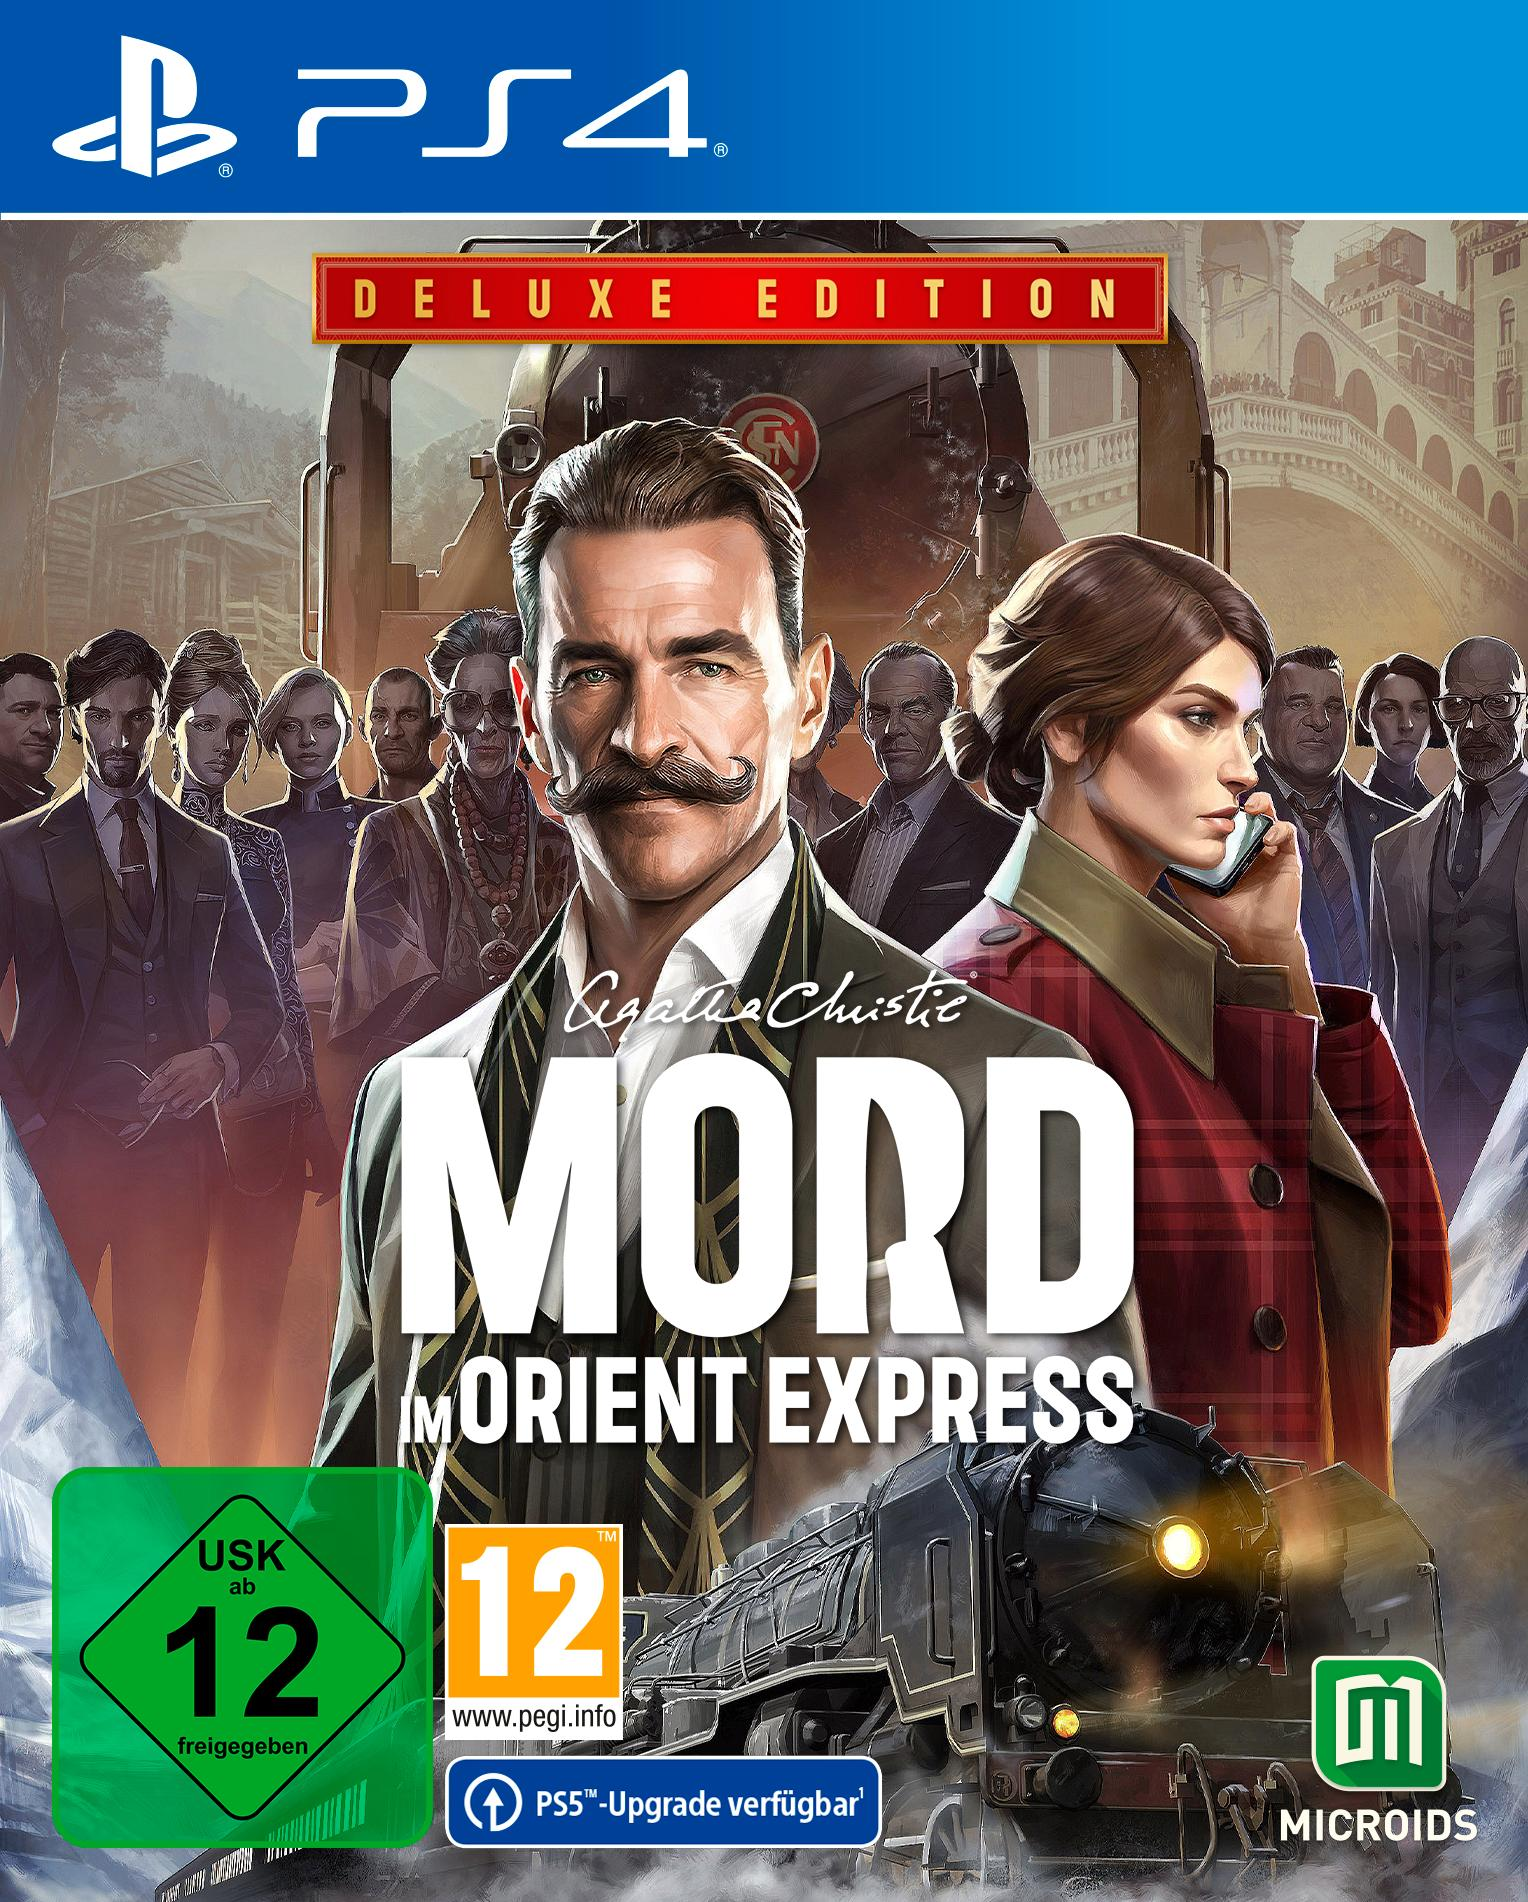 Express [PlayStation 4] - Orient - Mord Edition im Christie: Agatha Deluxe